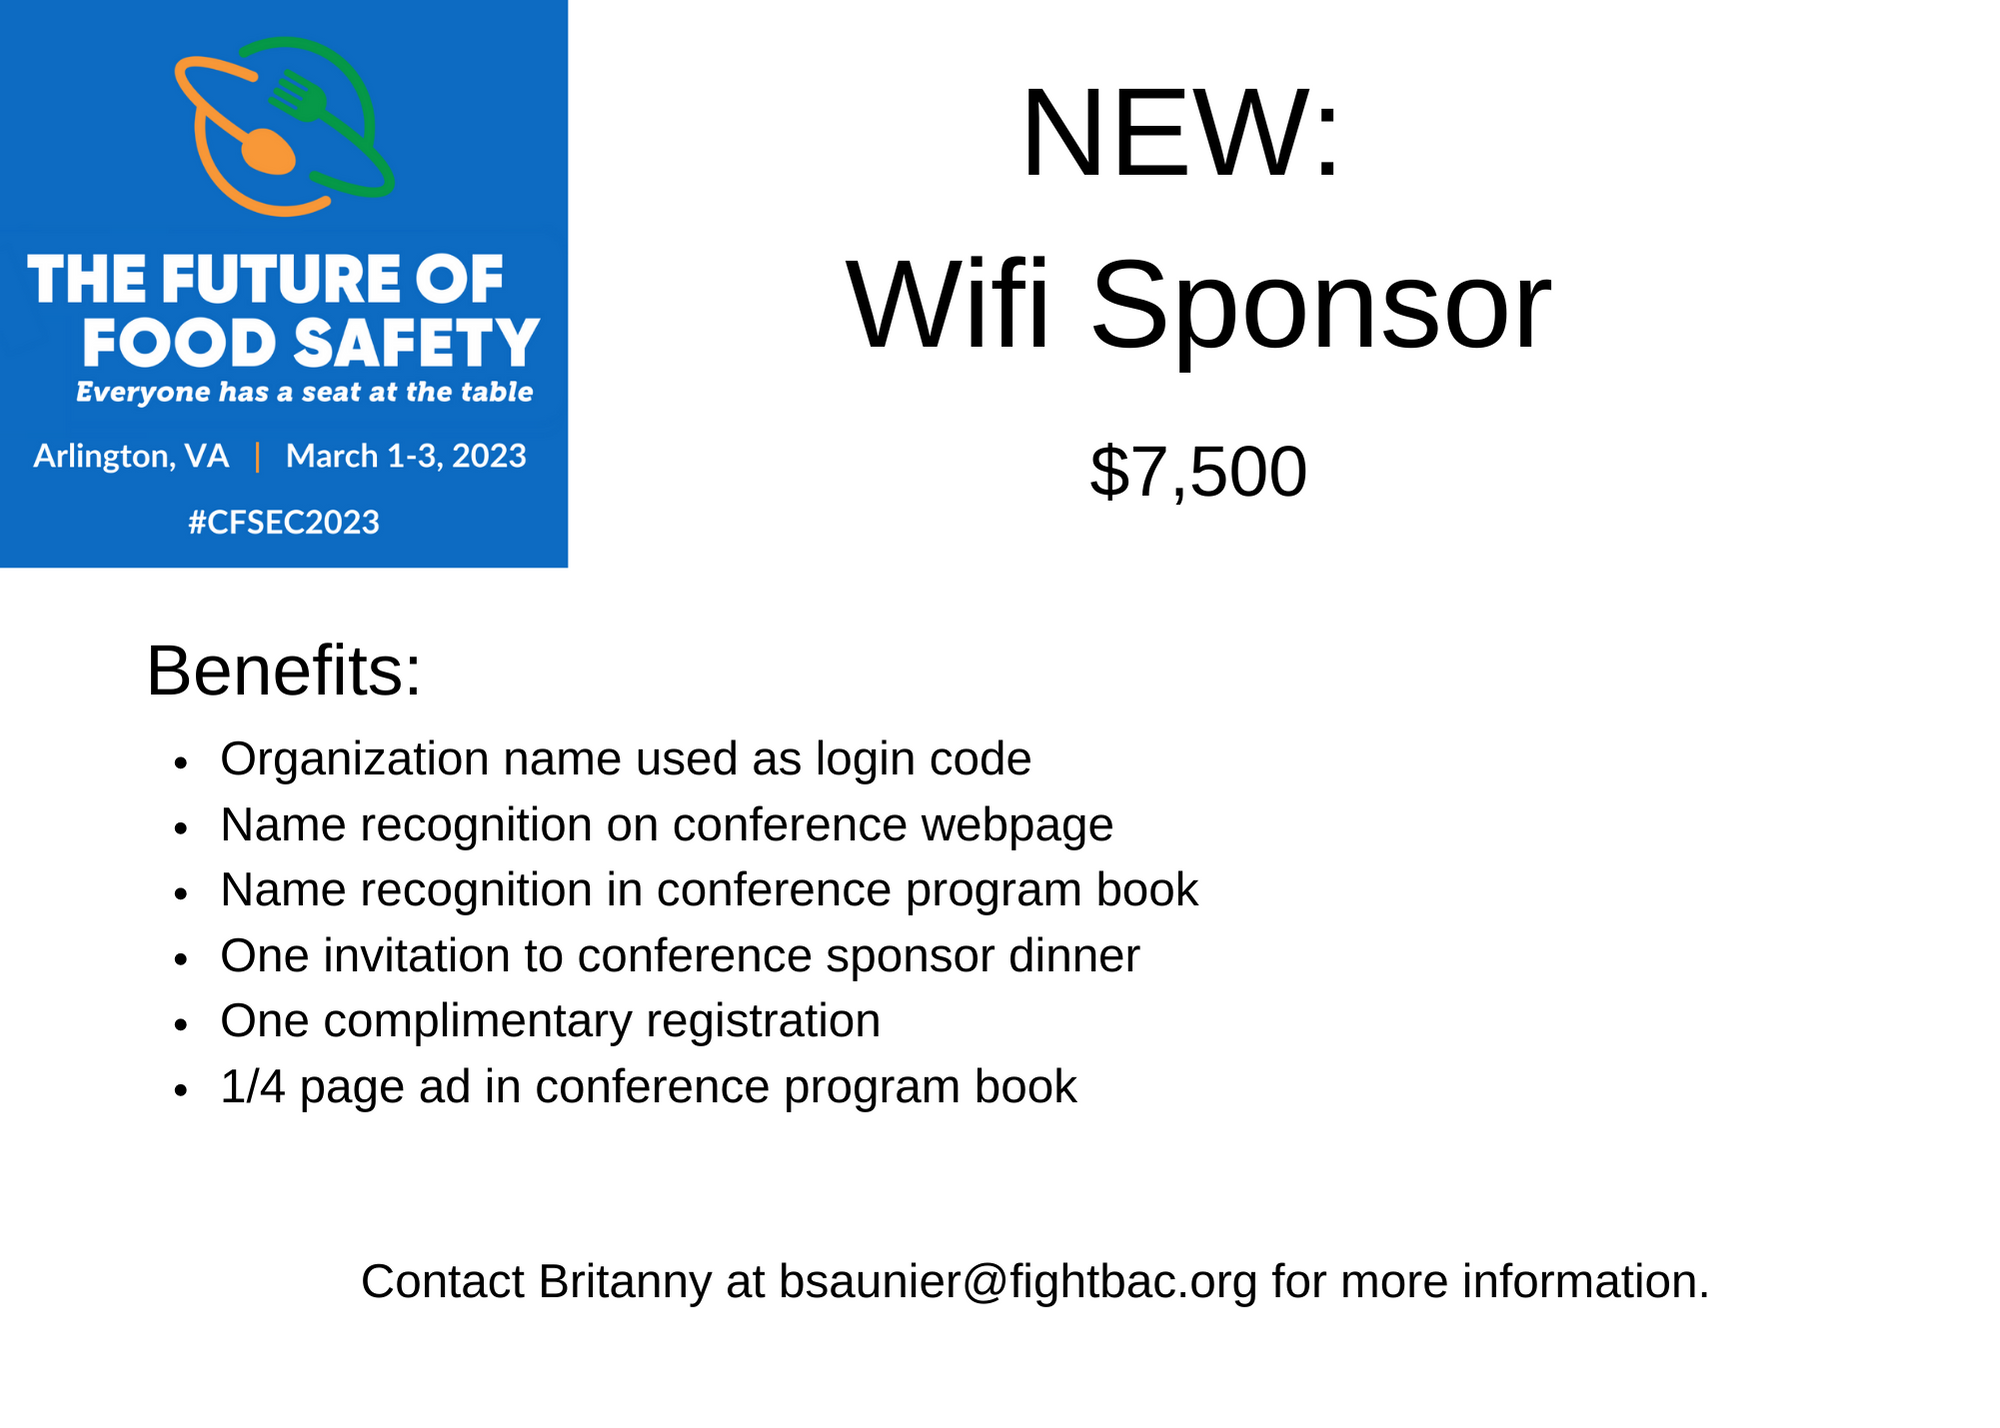 Ad for Wifi sponsorship for $7,500. Contact Britanny at bsaunier@fightbac.org for more info.